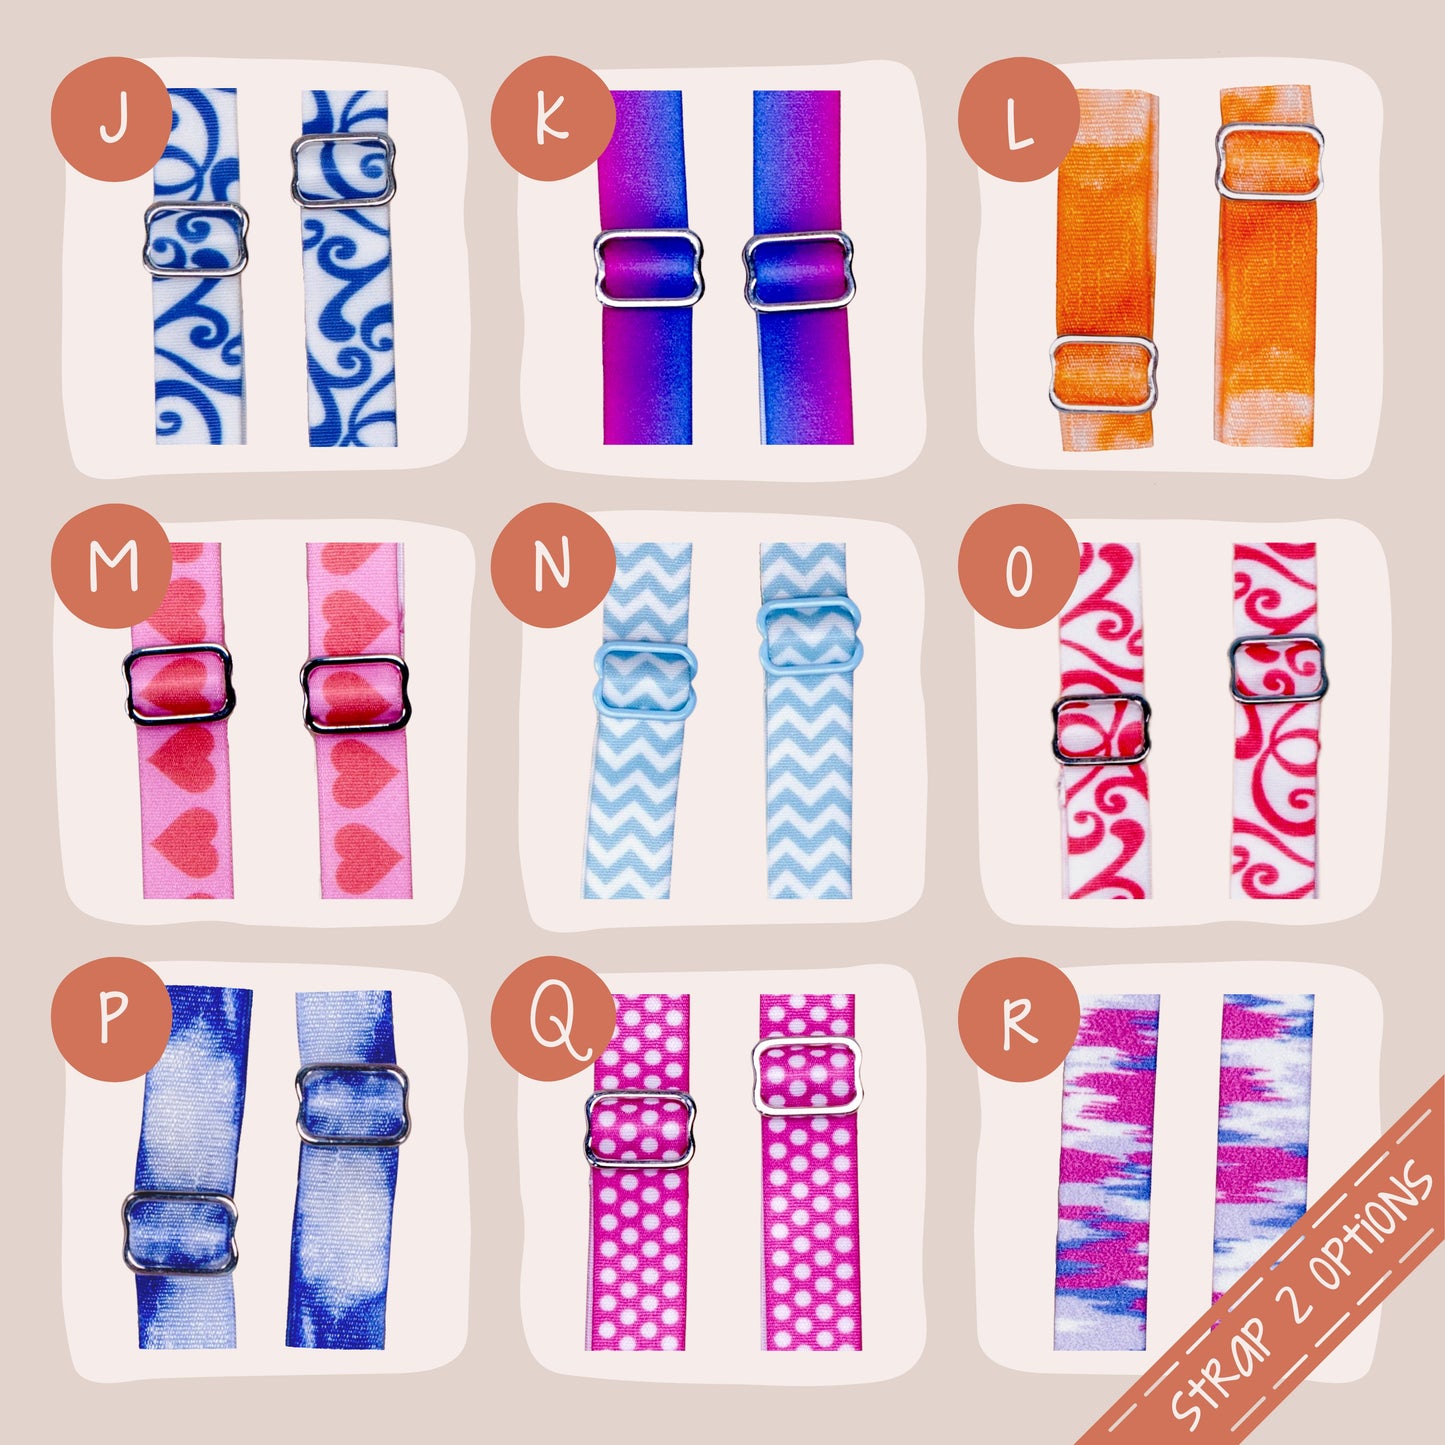 Grid of Strap 2 Options (from left to right, top to bottom): (j) Rollin' Blue, (k) Galaxy Ombre, (L) Clementine Tie-Dye, (m) Sweet Heart, (n) Baby Blue Chevron, (o) Rockin' Red, (p) Blueberry Tie-Dye, (Q) Strawberry Polka, (r) 3-D Static